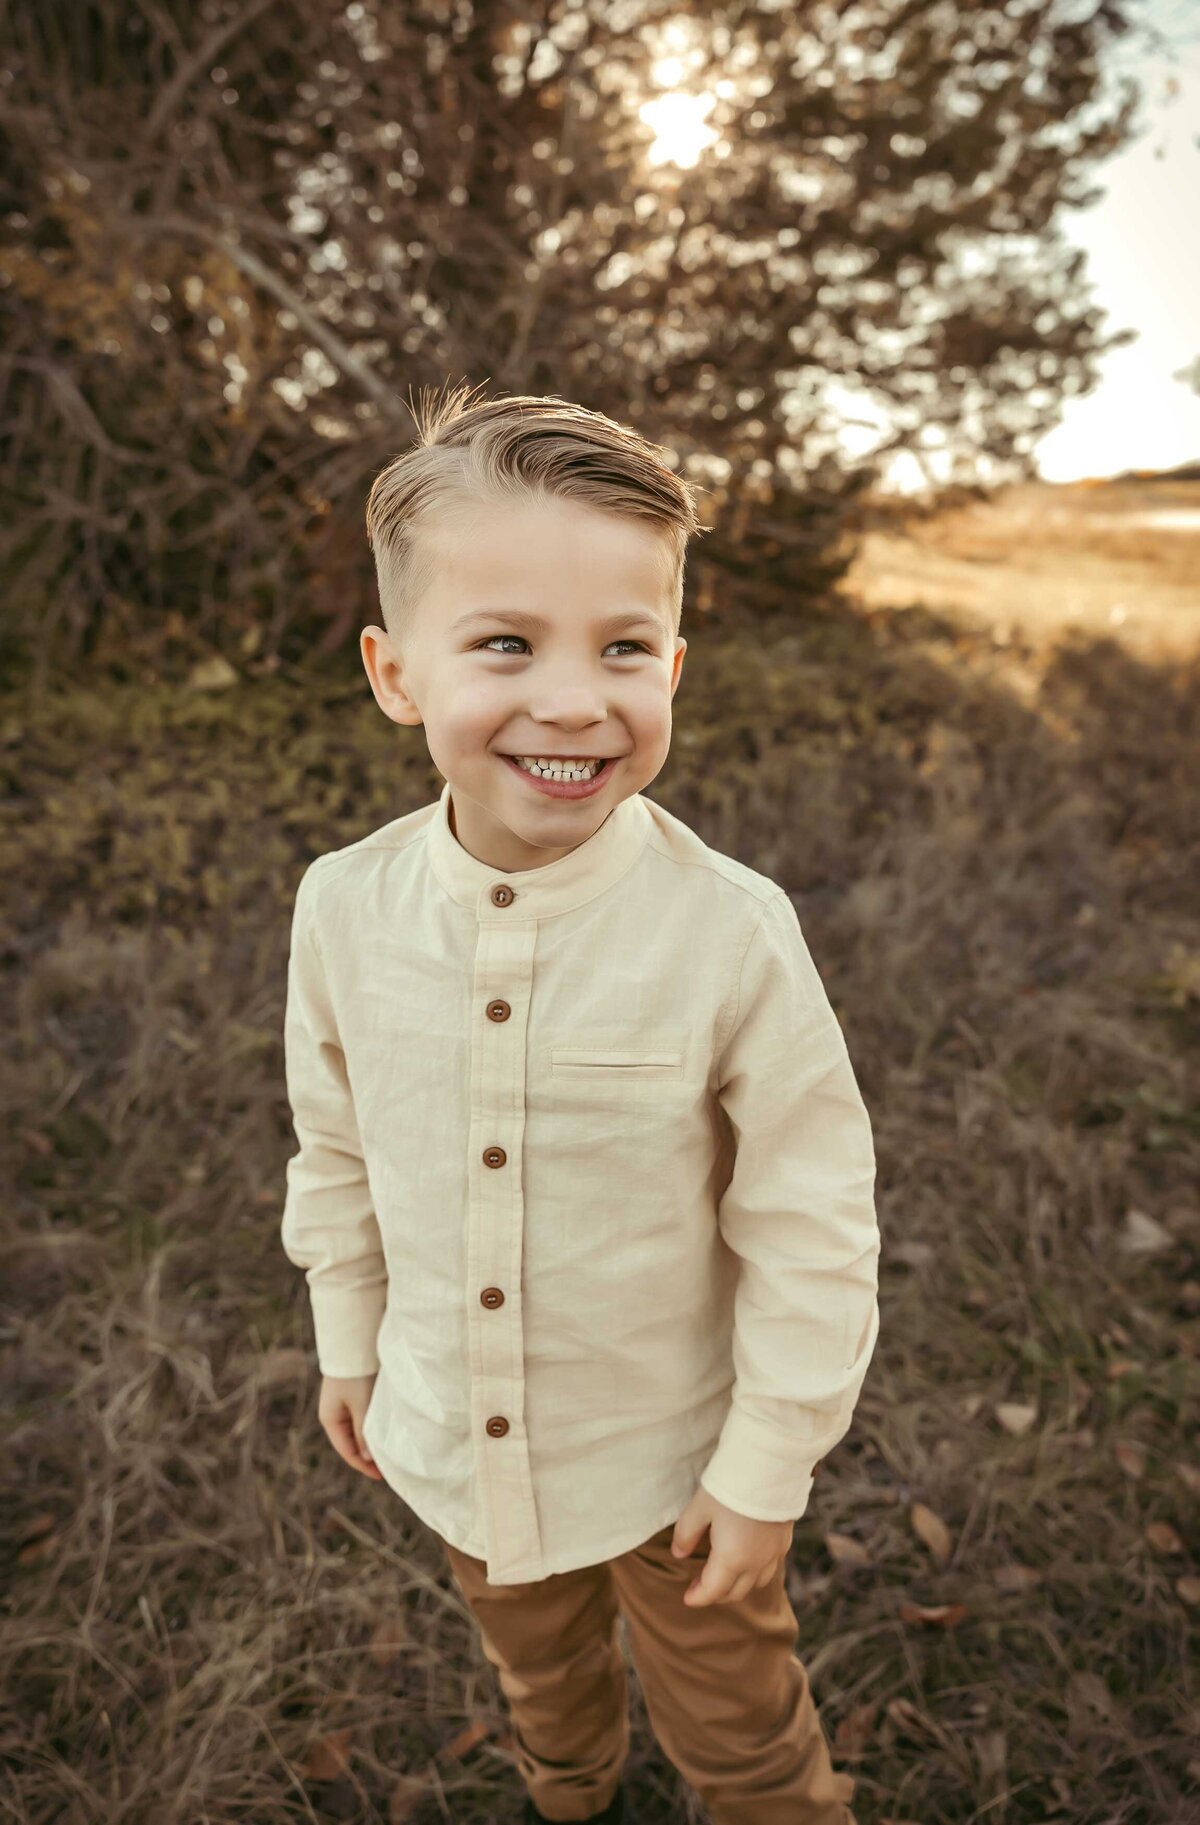 Boy smiling and wearing a light yellow shirt and a brown pants